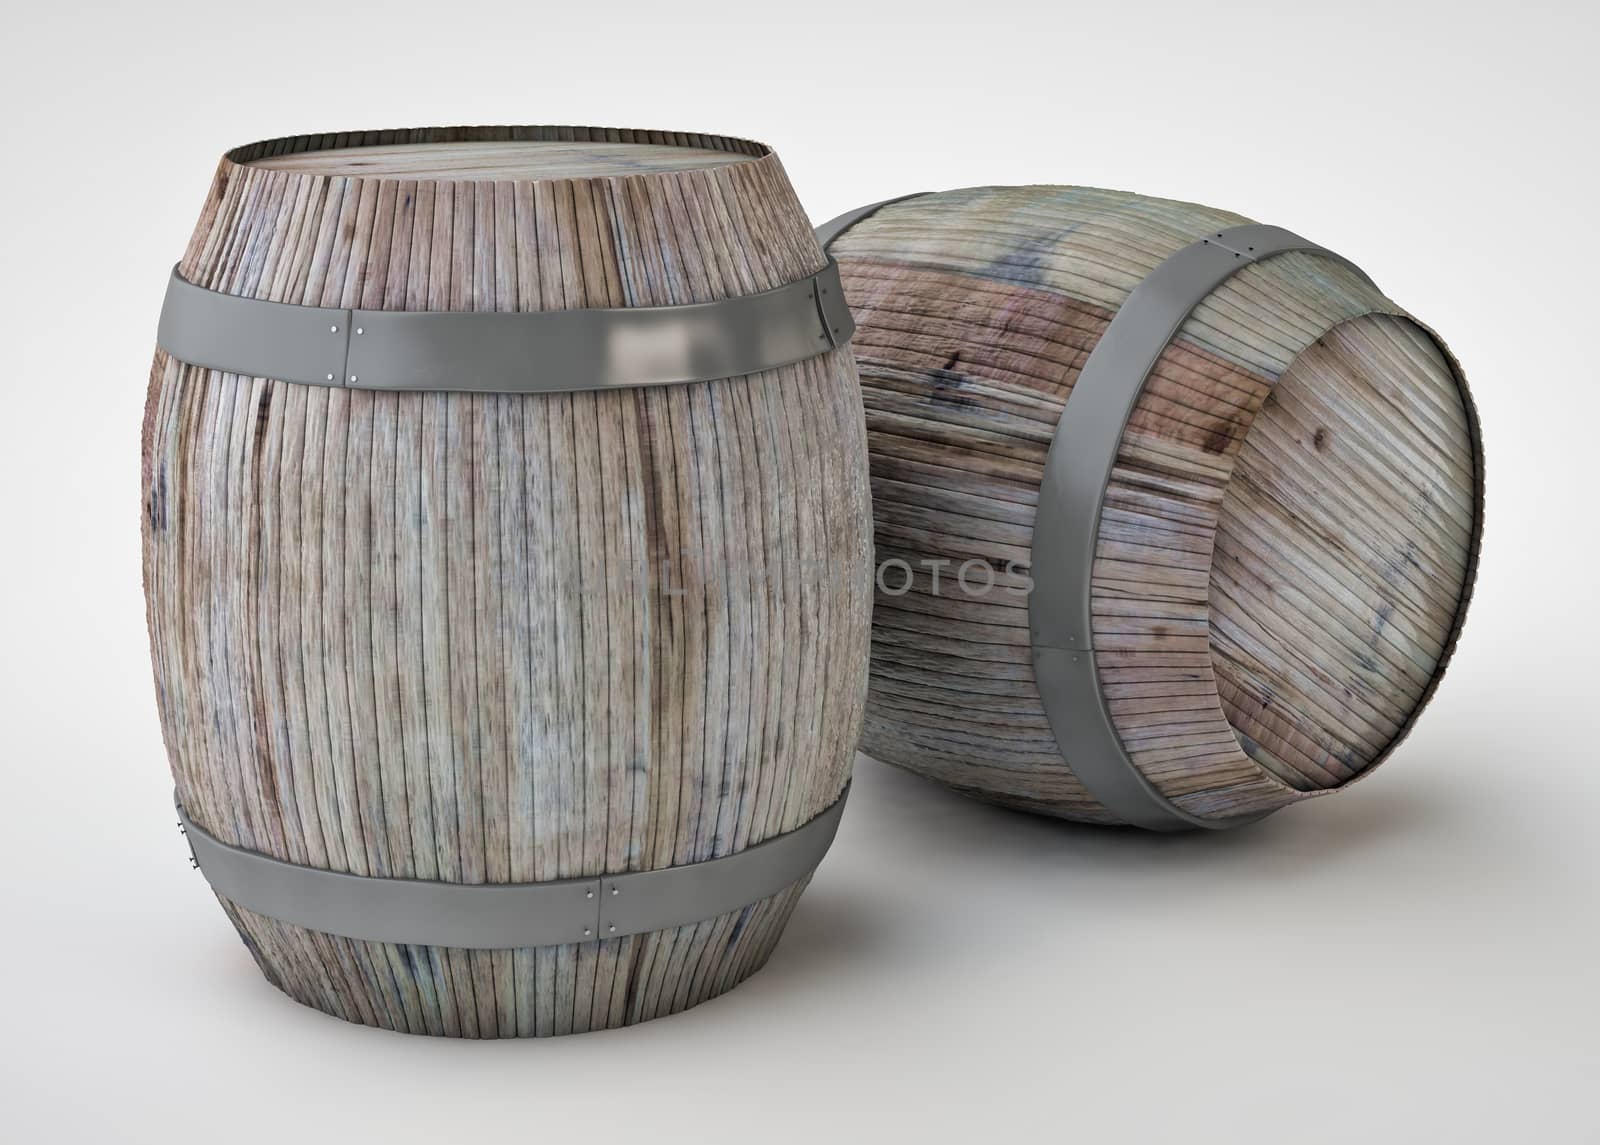 Beautiful wine barrels created in 3D program, rendered on white background